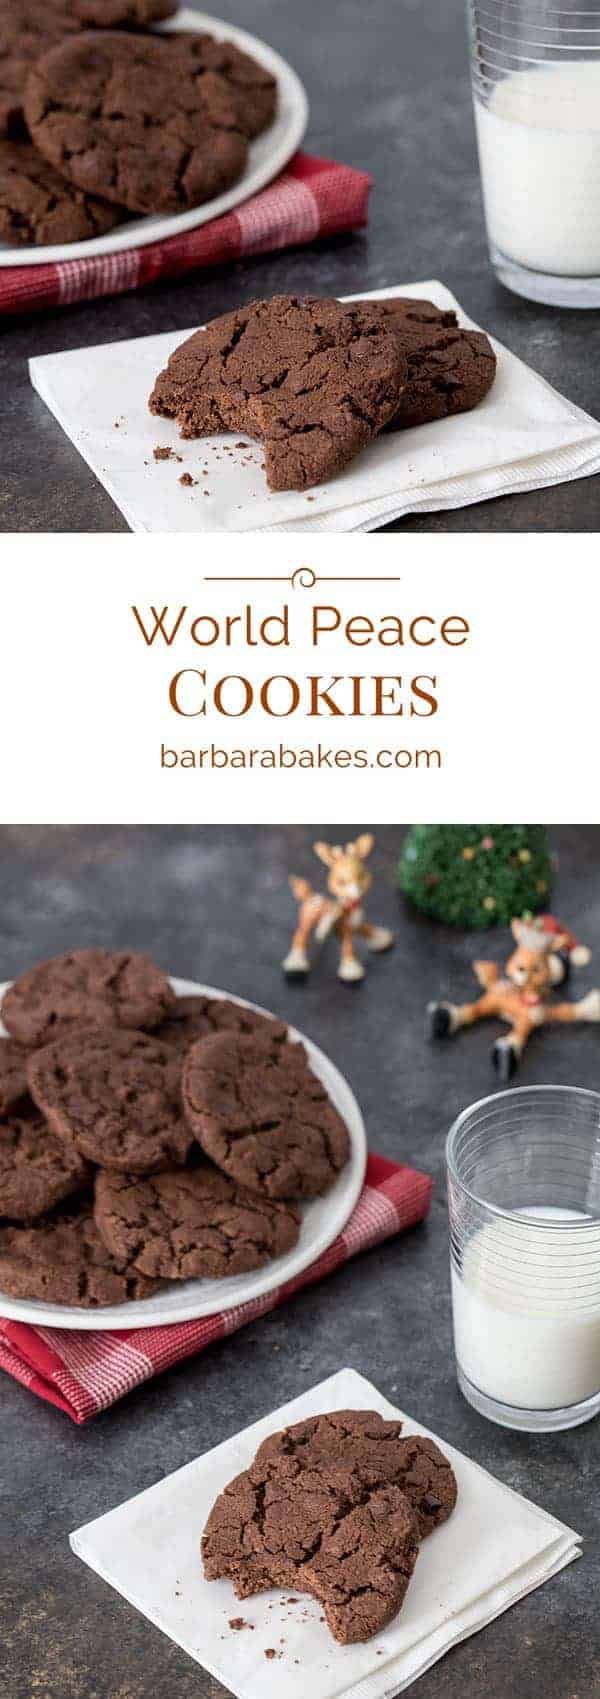 World Peace Cookies titled photo collage